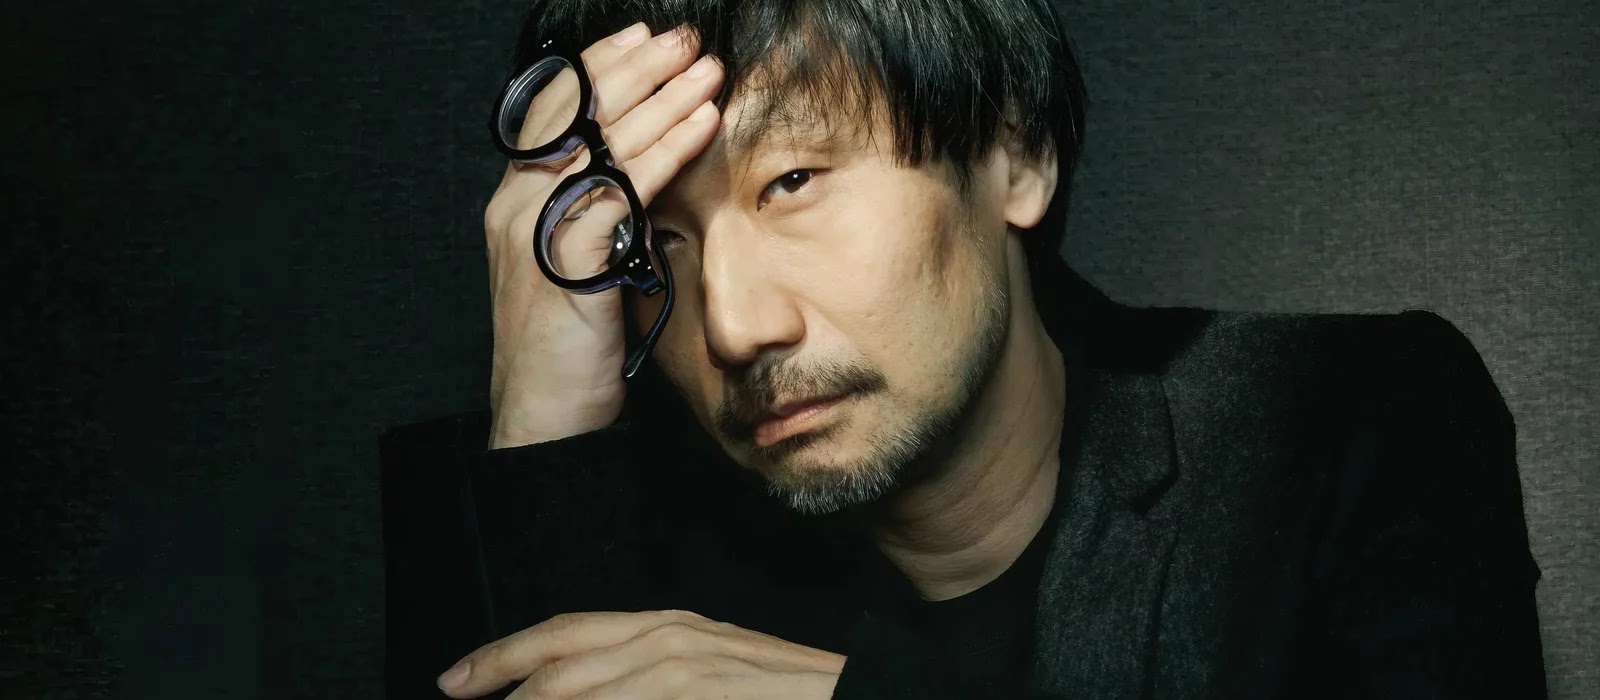 Top 10 interesting facts about Hideo Kojima, the most famous Japanese developer